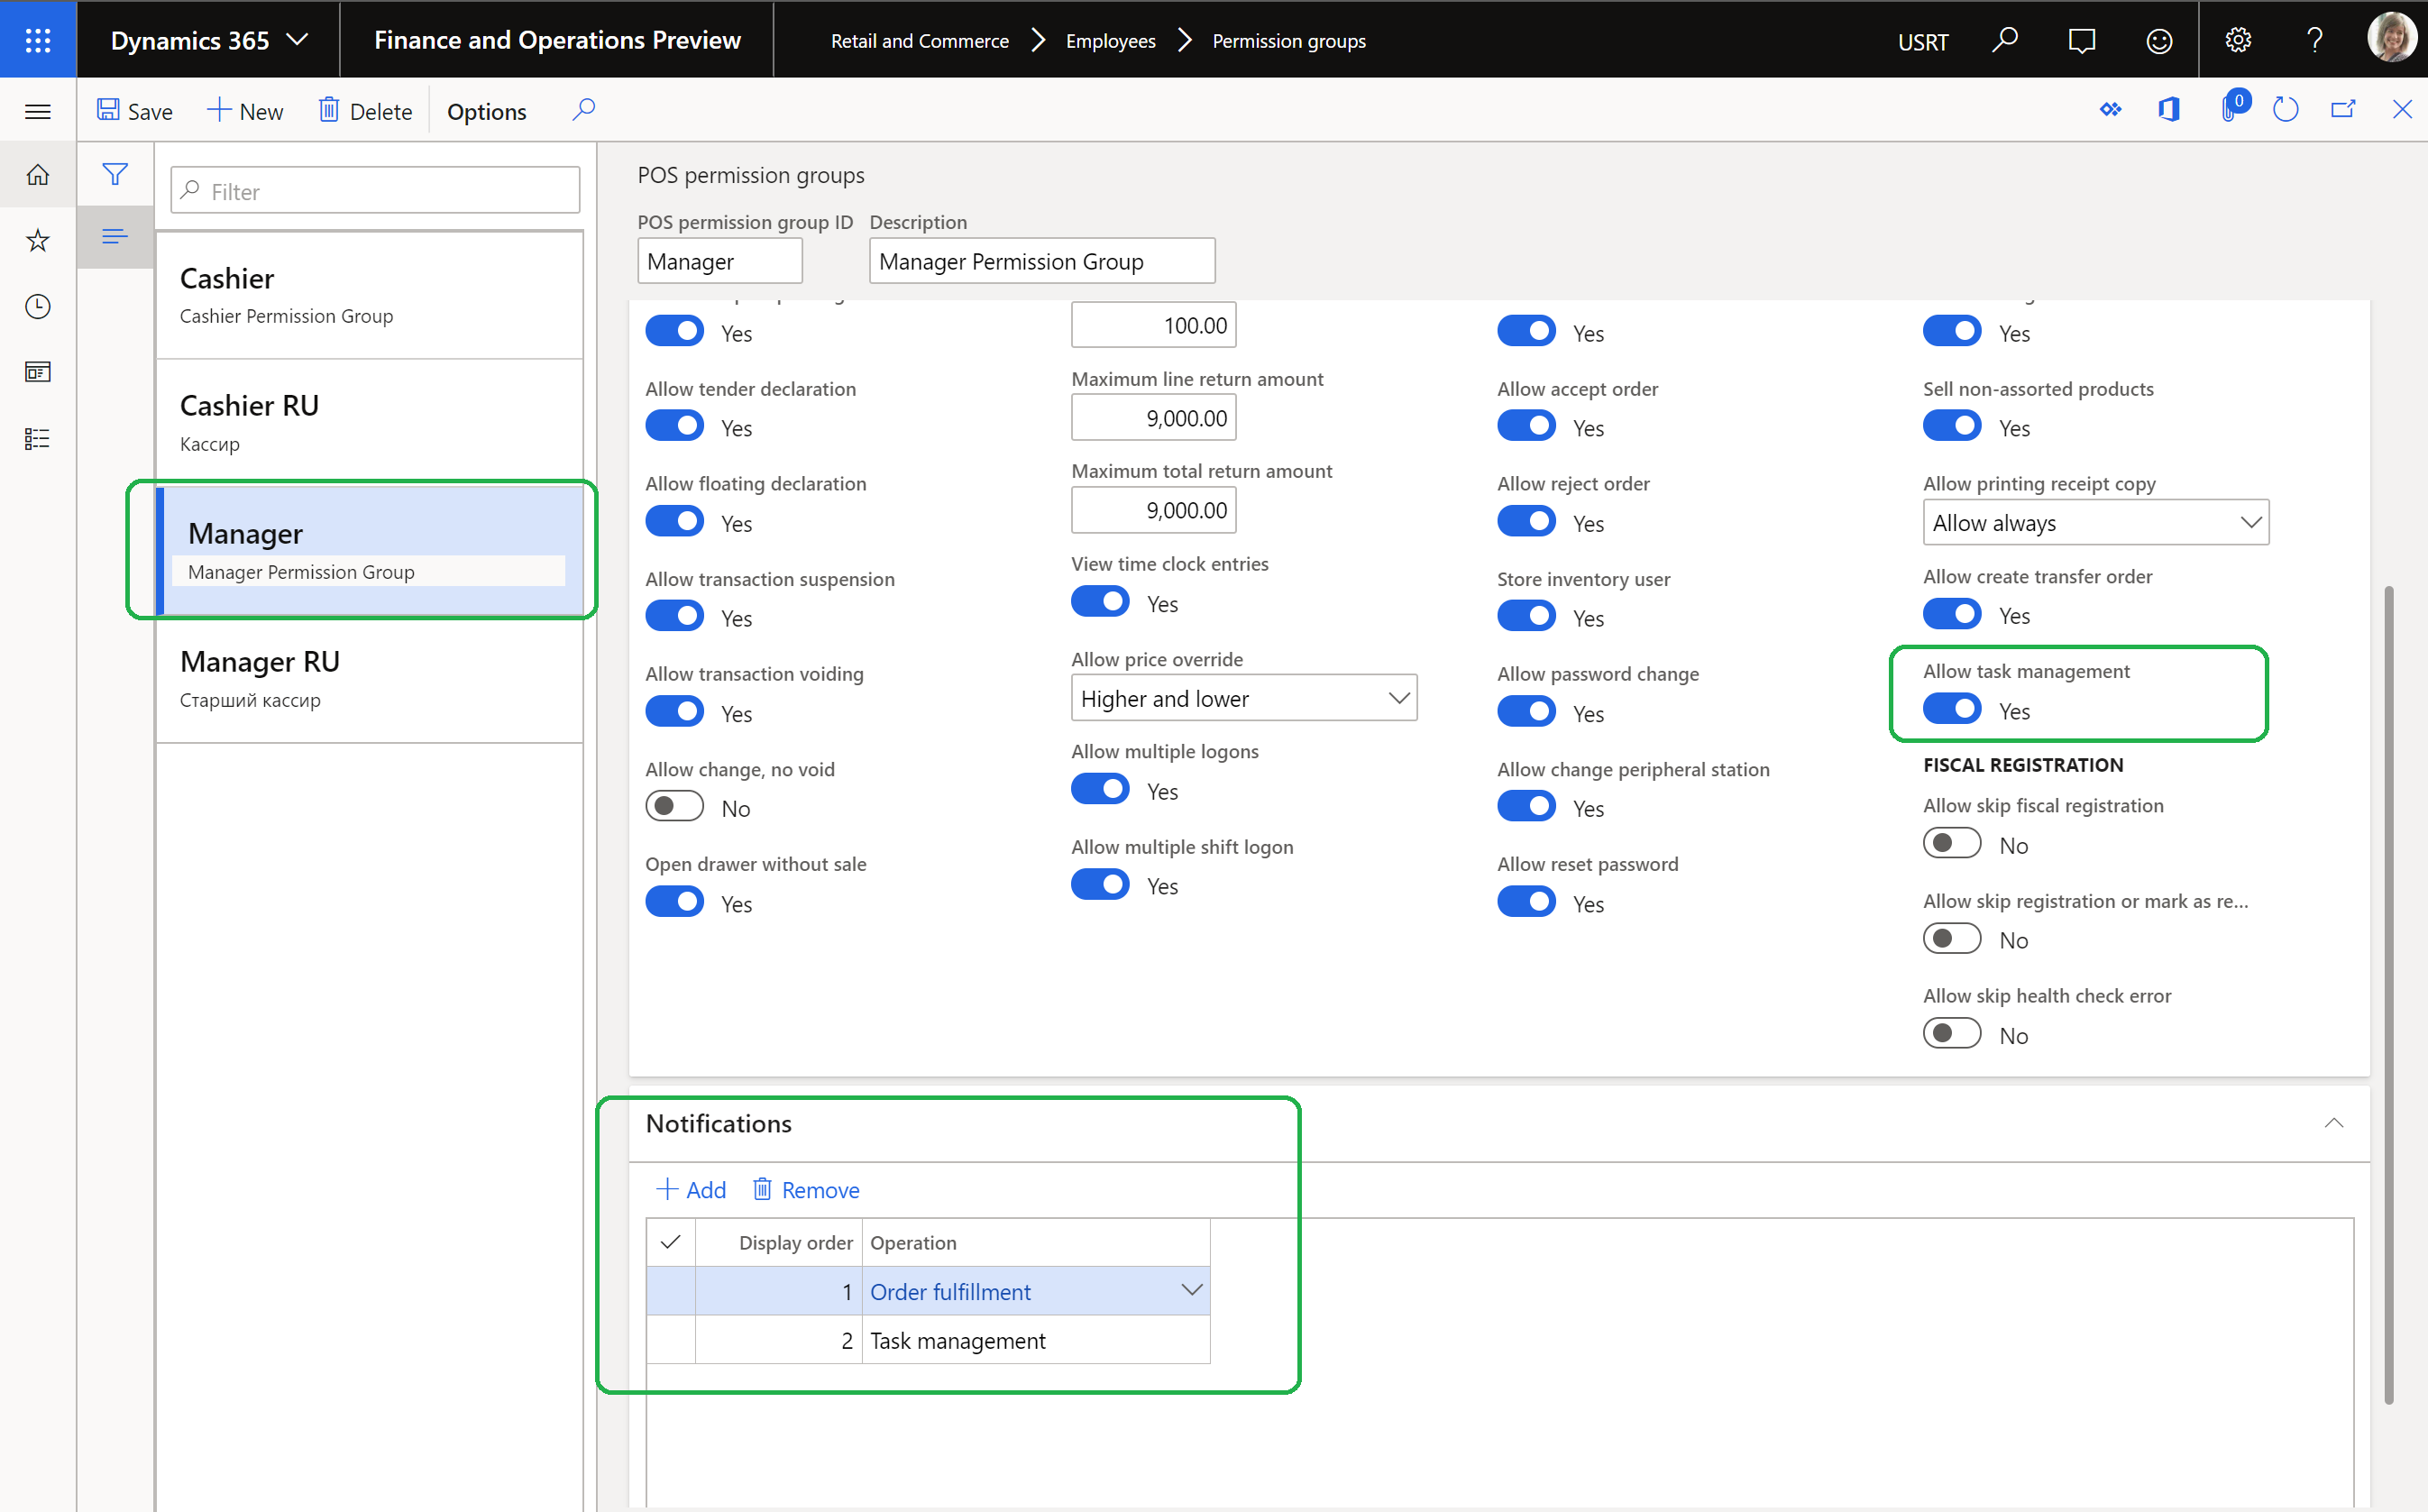 Configuring task management permissions for store managers.